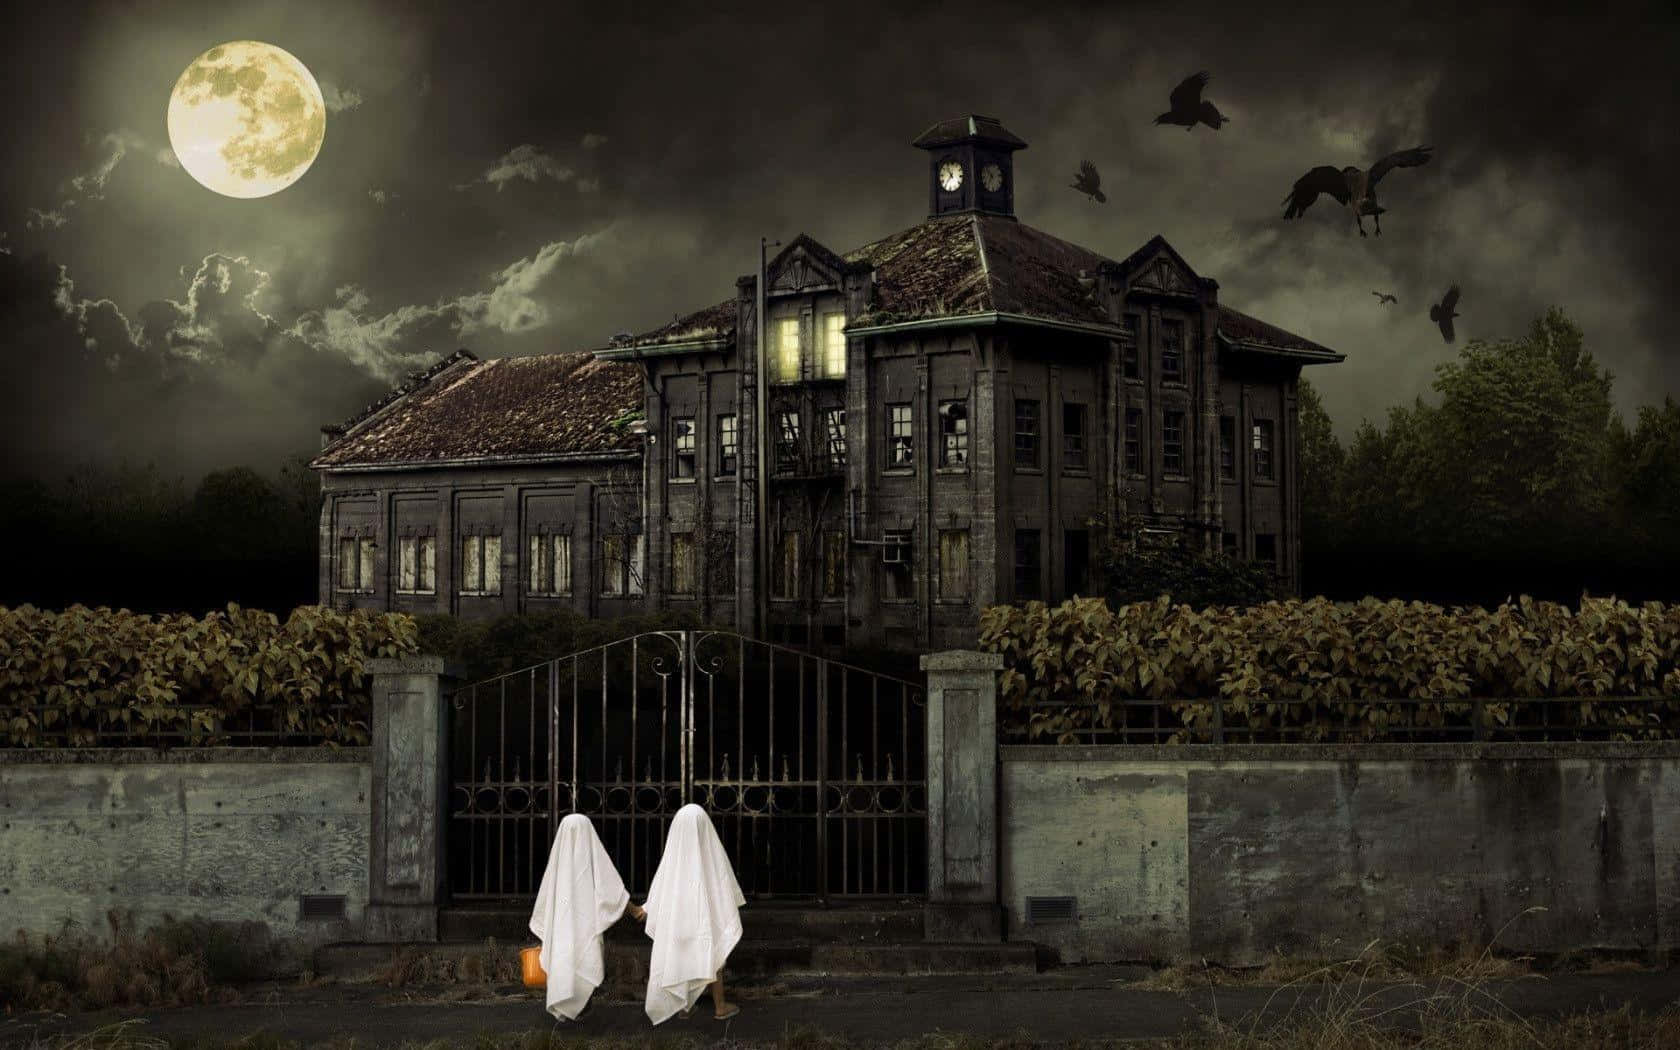 A group of kids in Halloween costumes enjoy trick-or-treating at a haunted house.